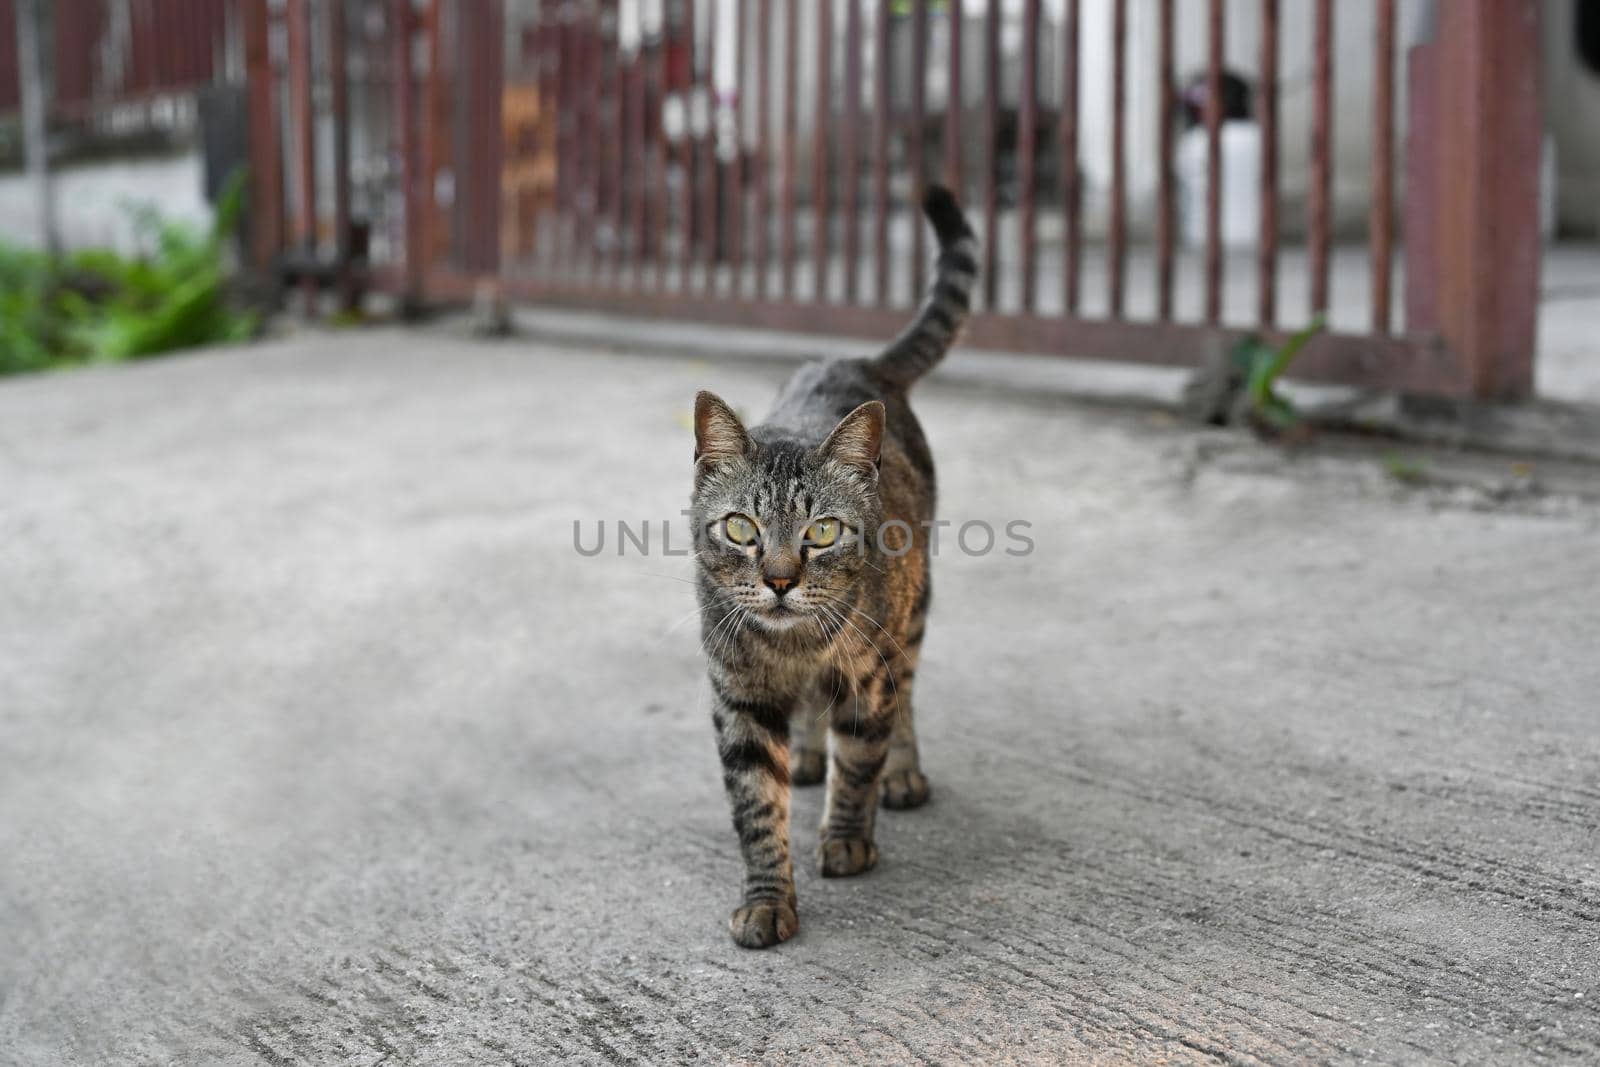 Gray cat with tiger stripes walking on the sidewalk at sunny day. by prathanchorruangsak